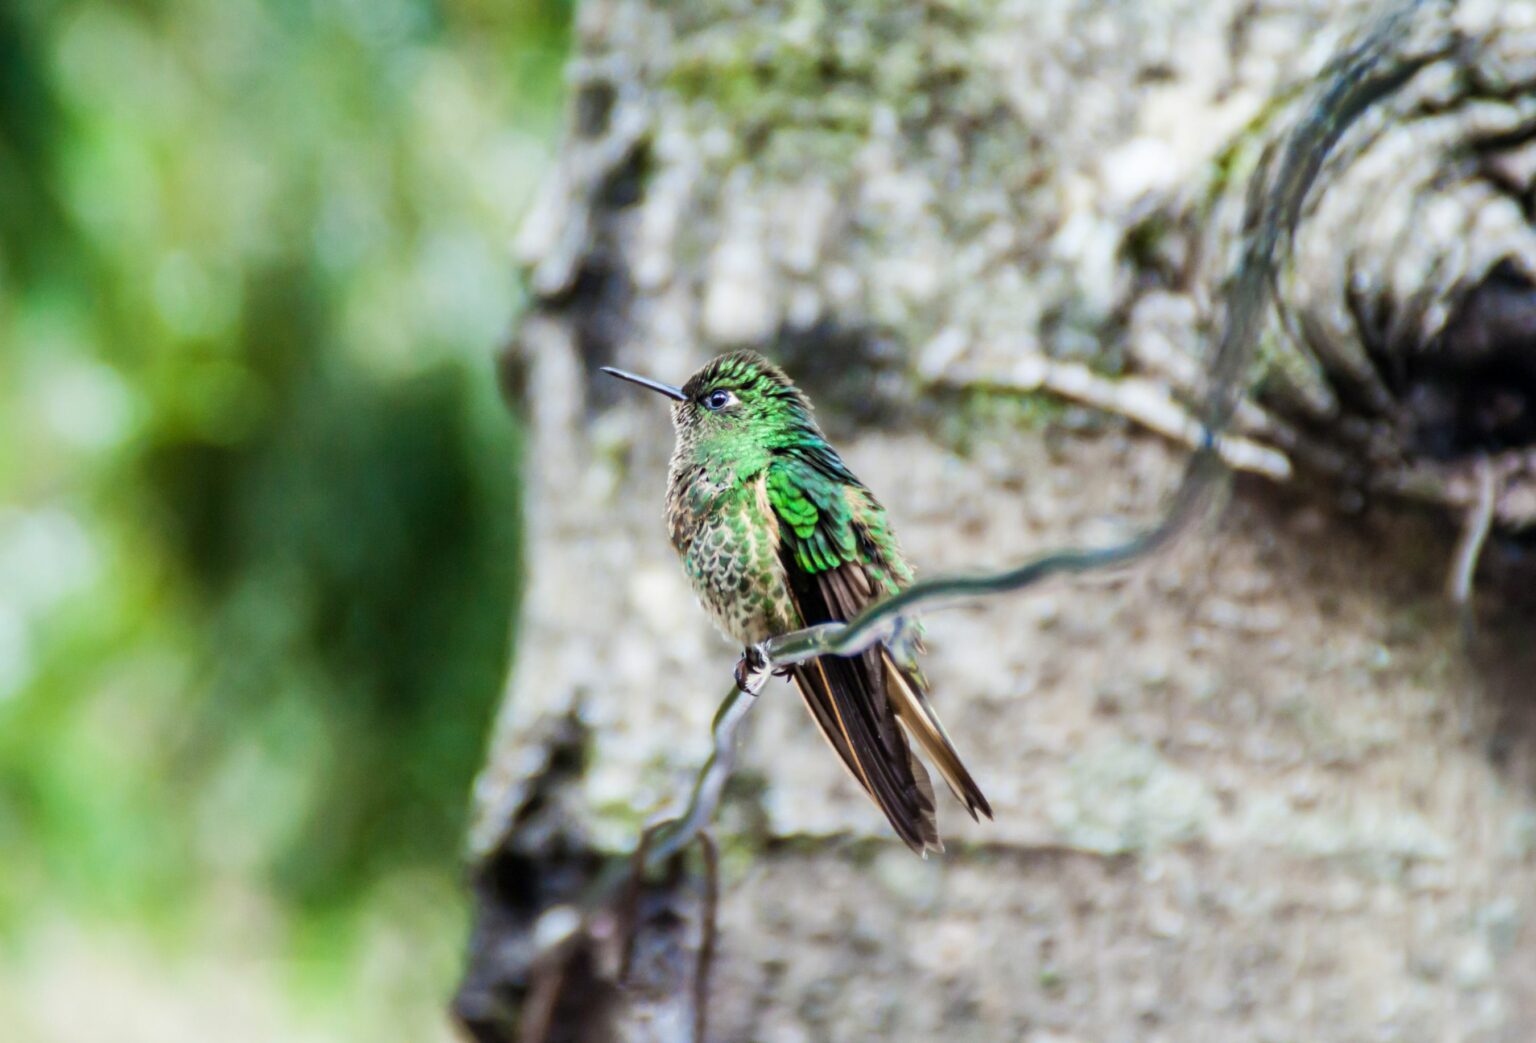 a small green bird perched on a tree branch.